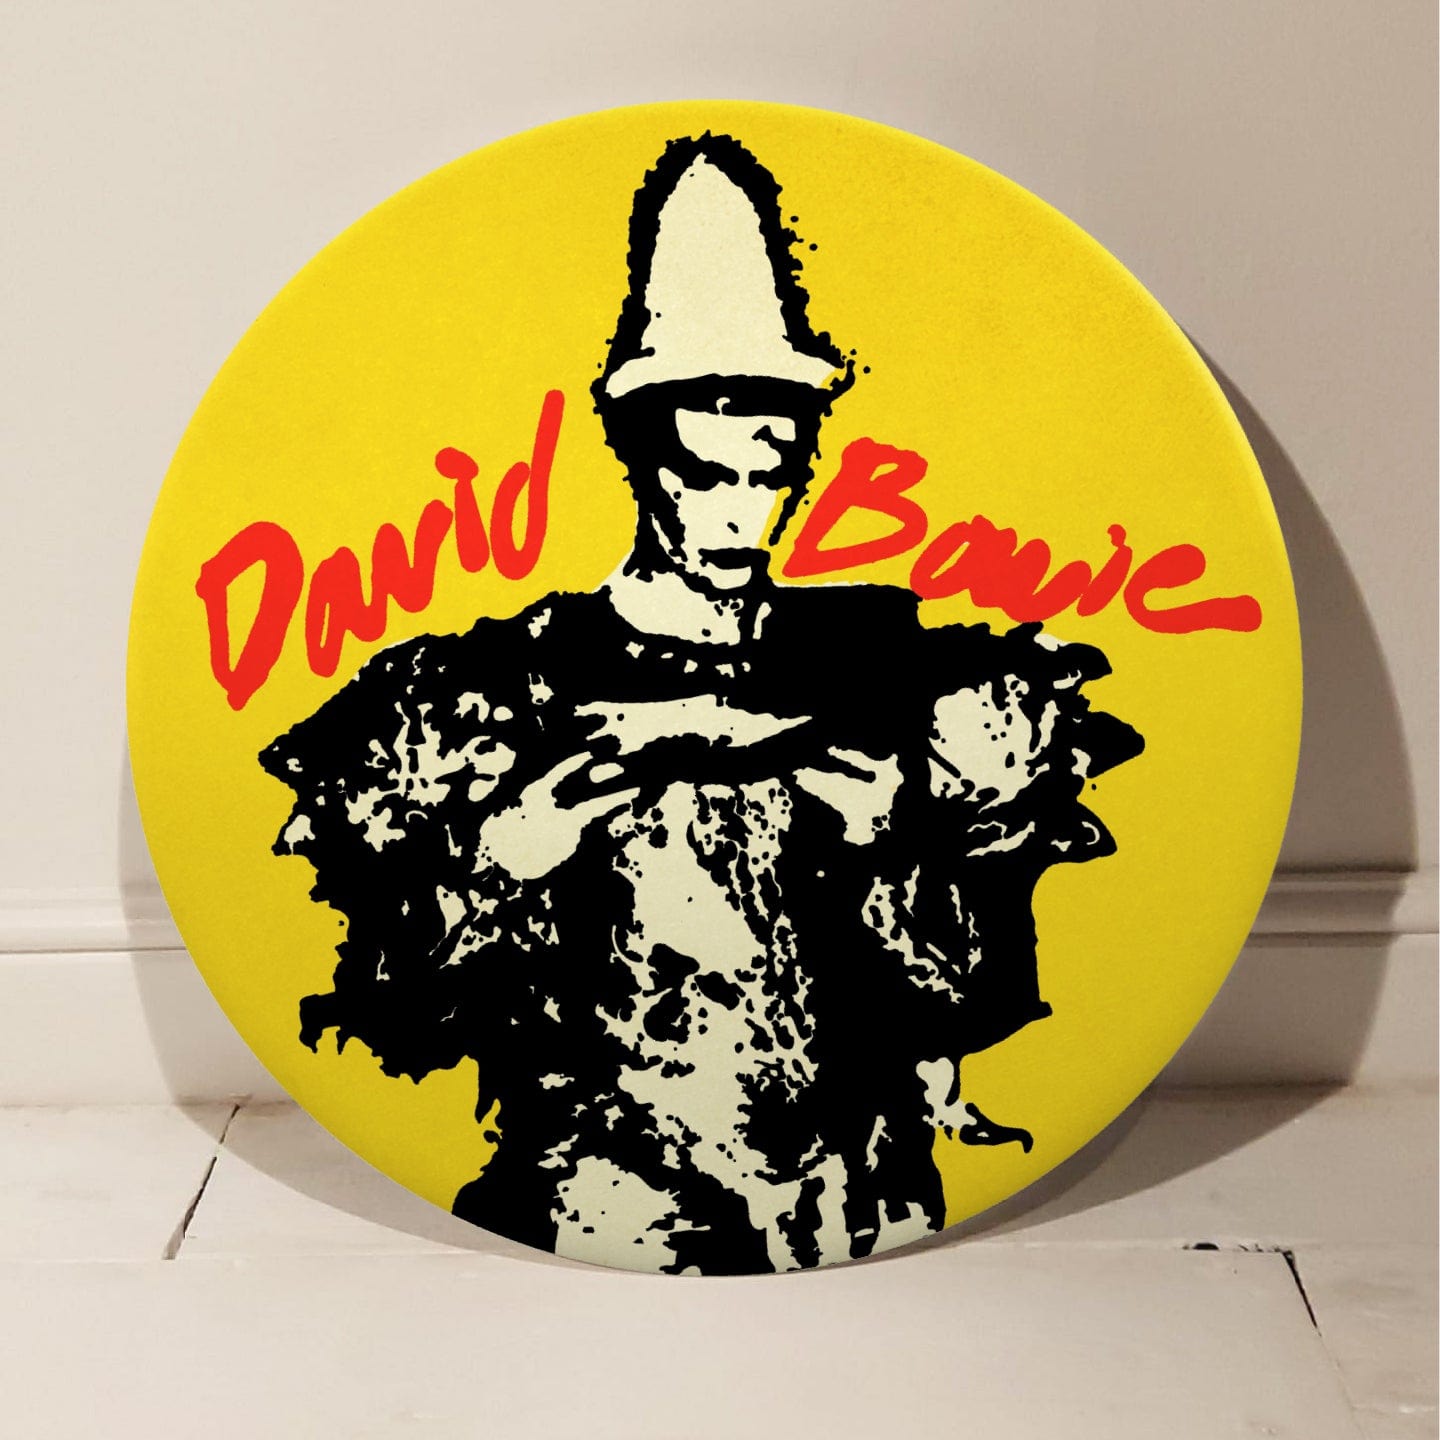 David Bowie (Ashes to Ashes) GIANT 3D Vintage Pin Badge Enlarged